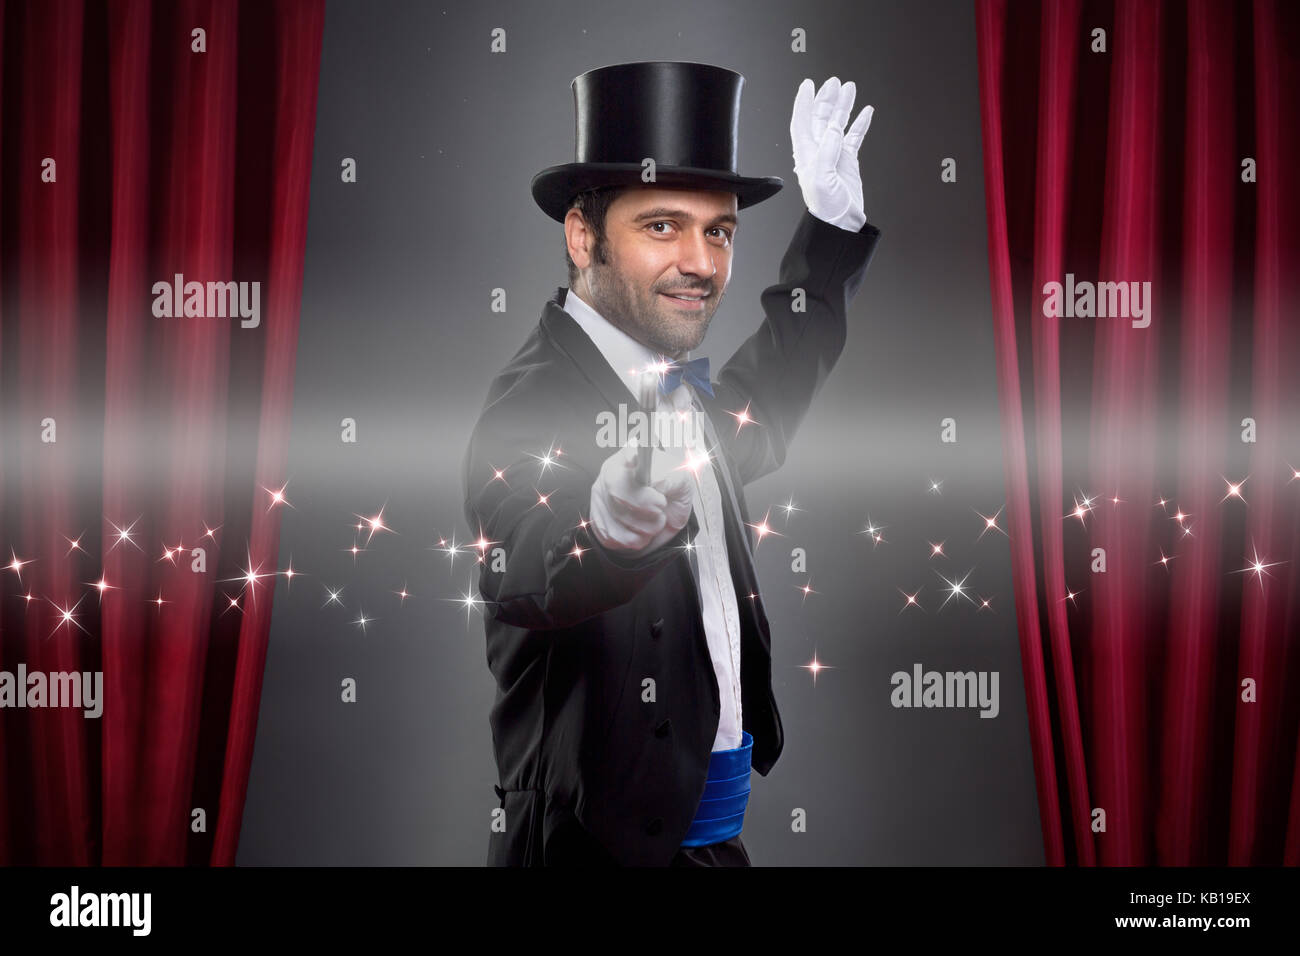 Magician  in costume showing spectacular trick Stock Photo